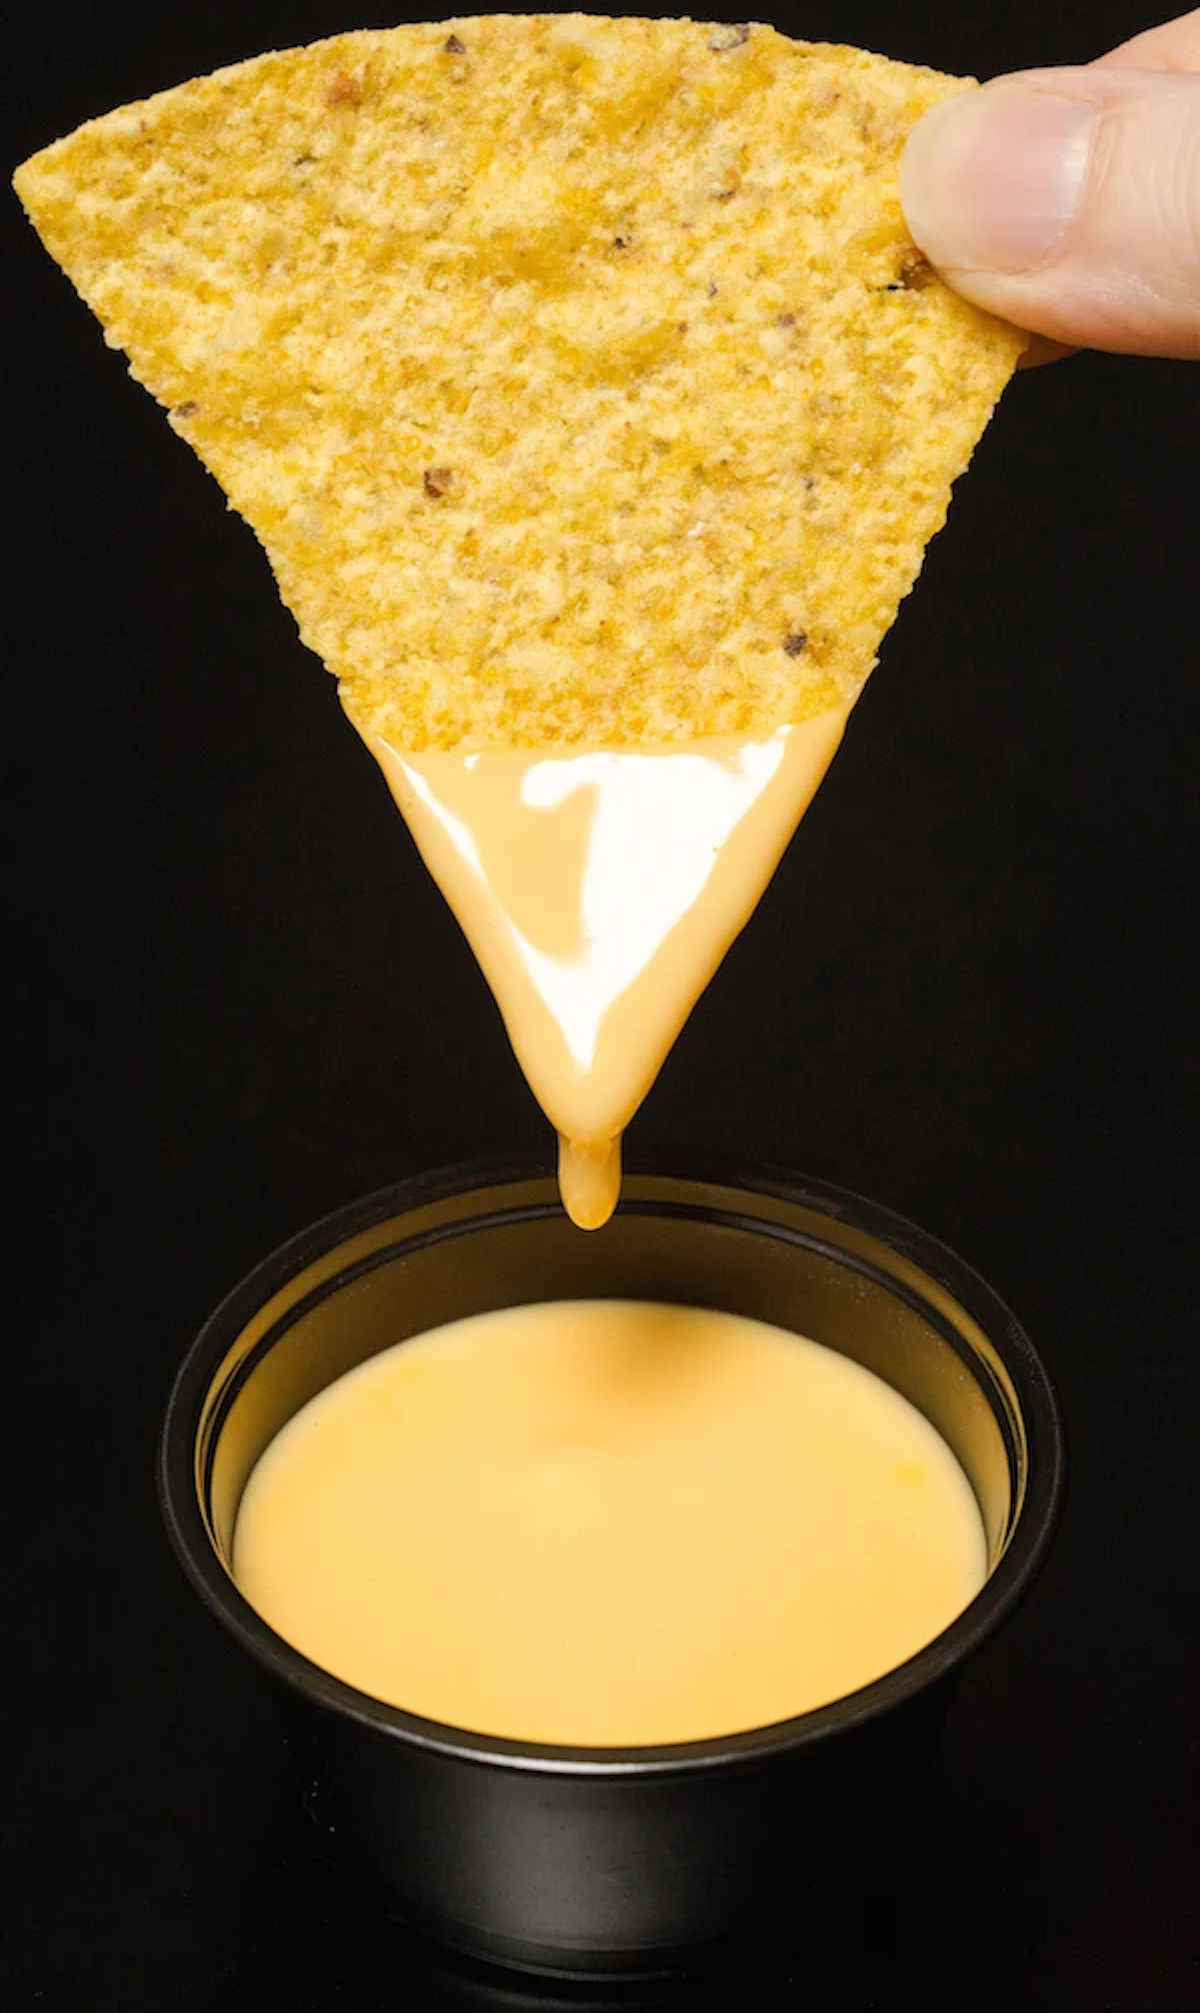 A hand holds a single tortilla chip that's been dipped in nacho cheese sauce.